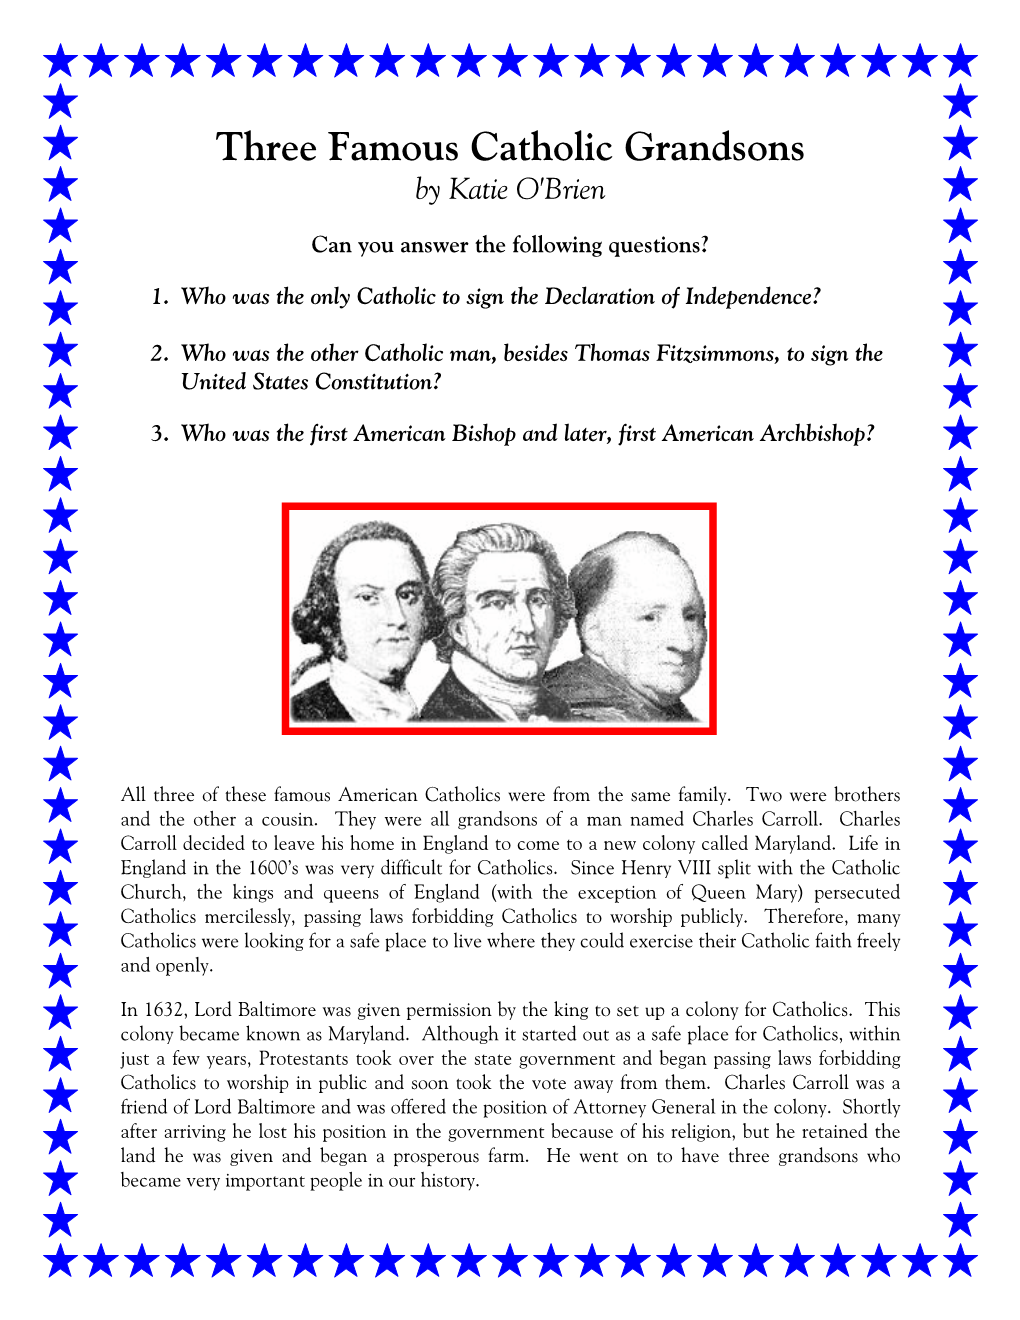 Three Famous Catholic Grandsons by Katie O'brien